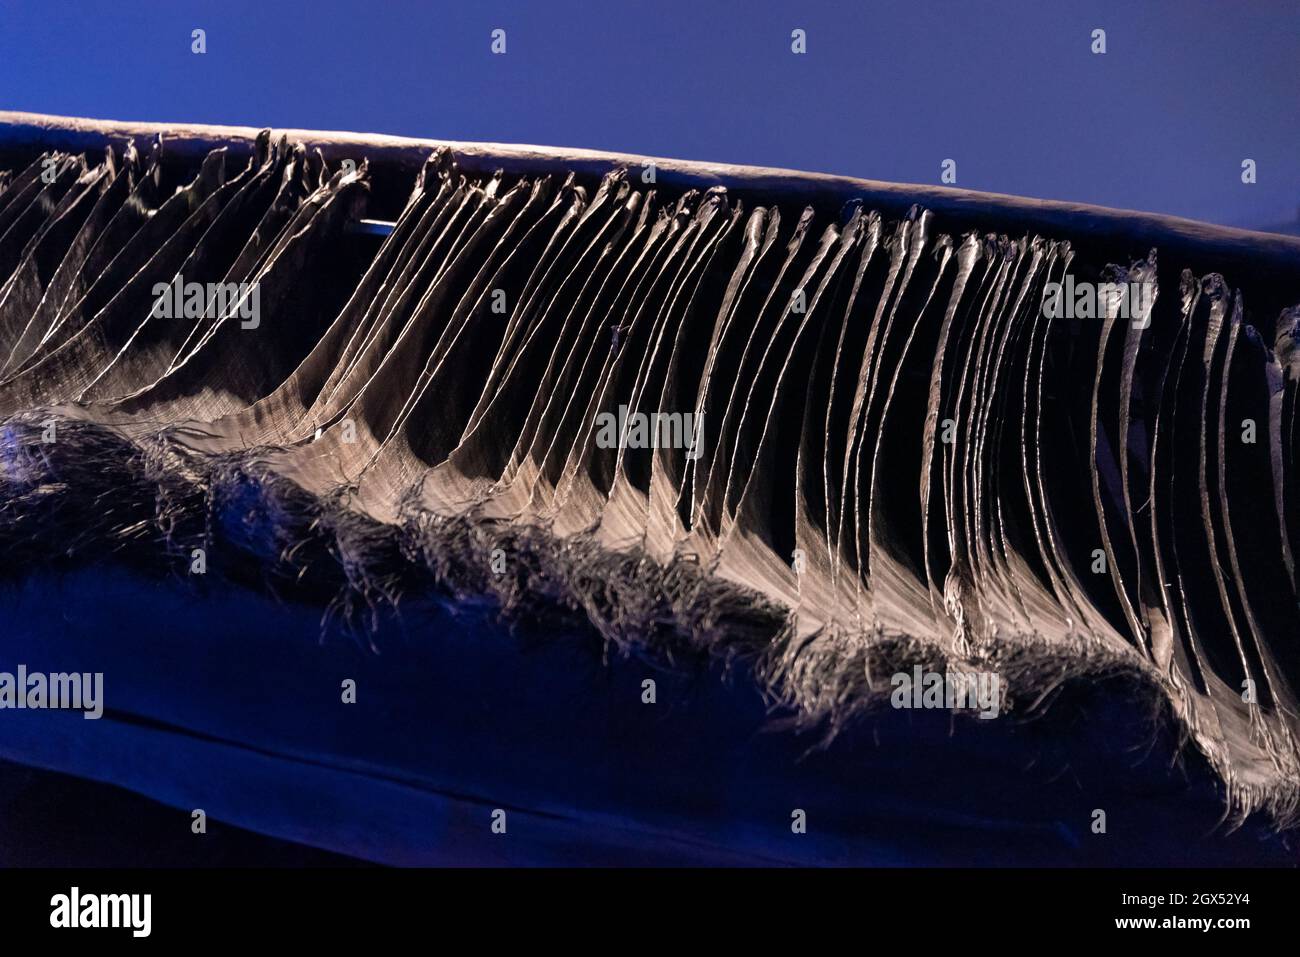 The baleen of a whale (detail). The image was taken in the Royal Ontario Museum (ROM) in the exhibition named 'Great Whales'. Stock Photo